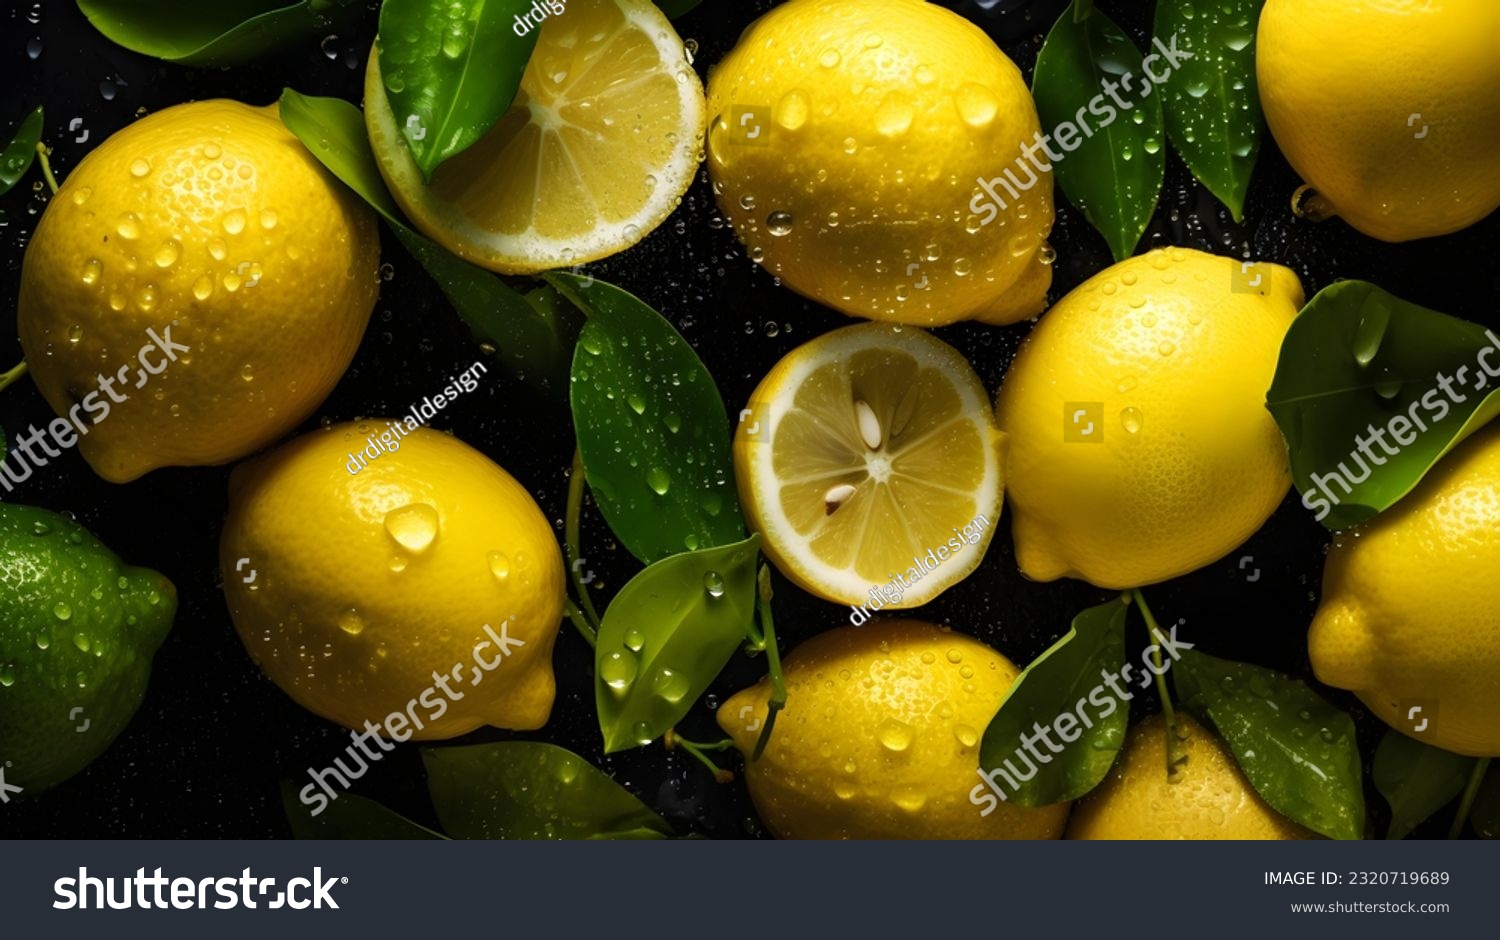 Overhead Shot of Lemons with visible Water Drops. Close up.
 #2320719689